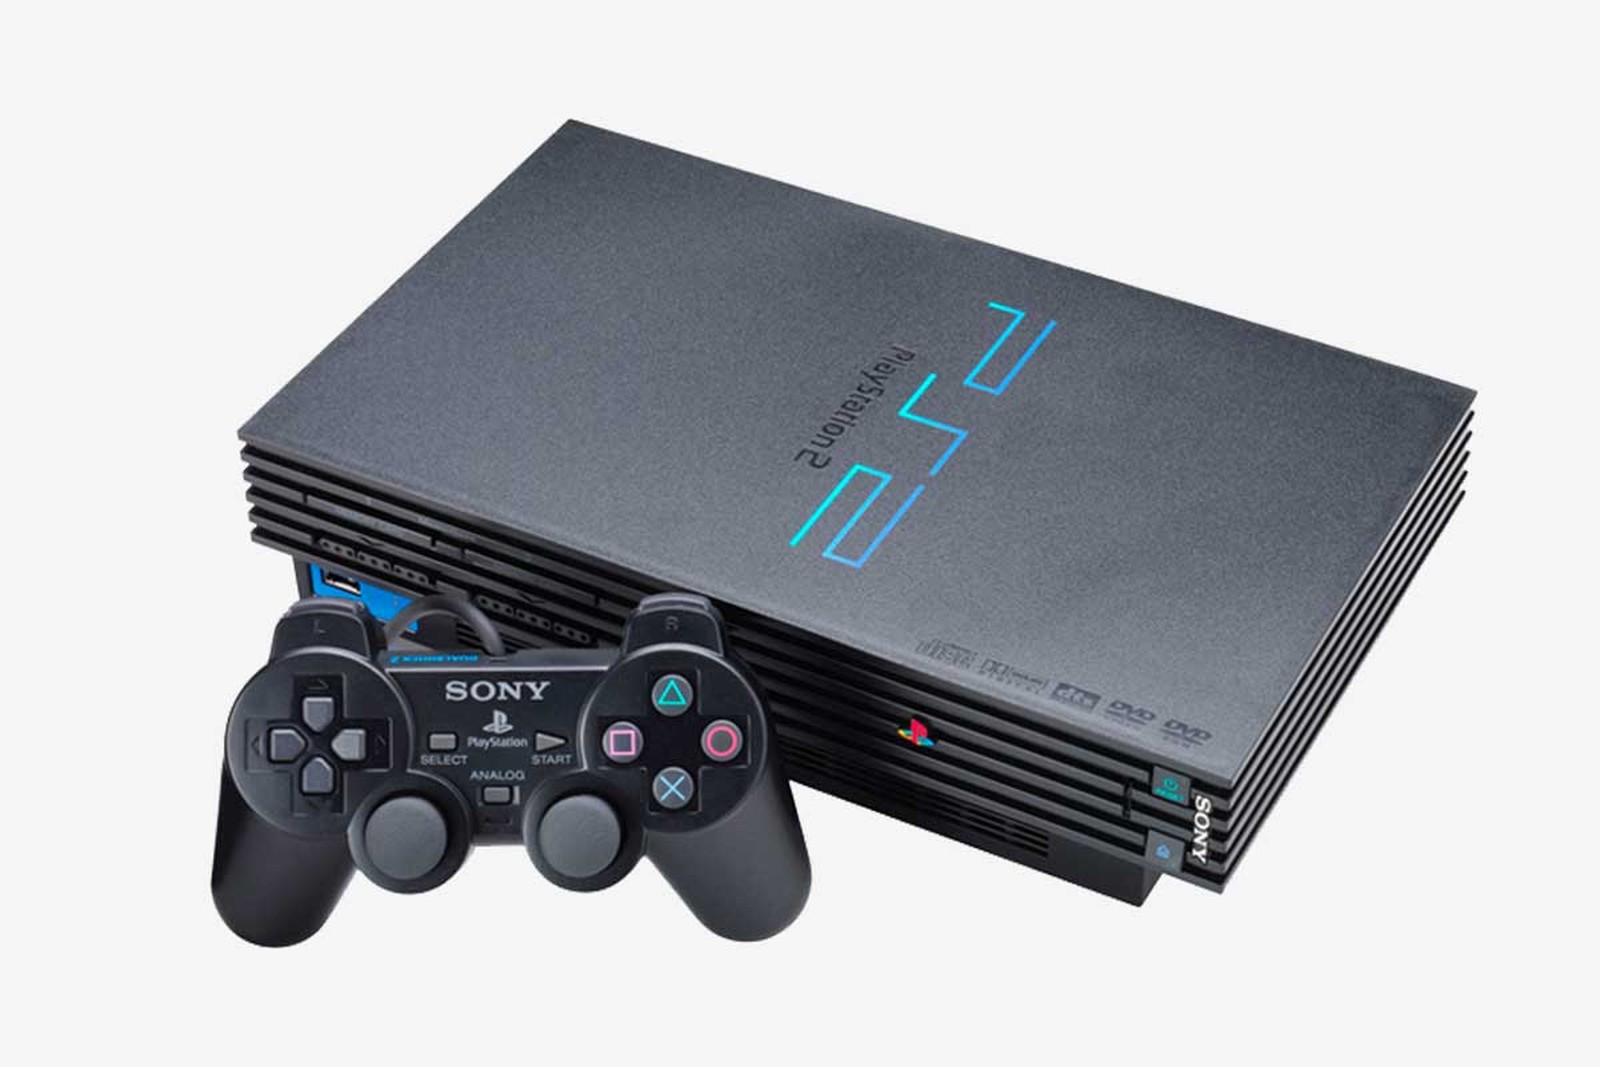 PS2 image